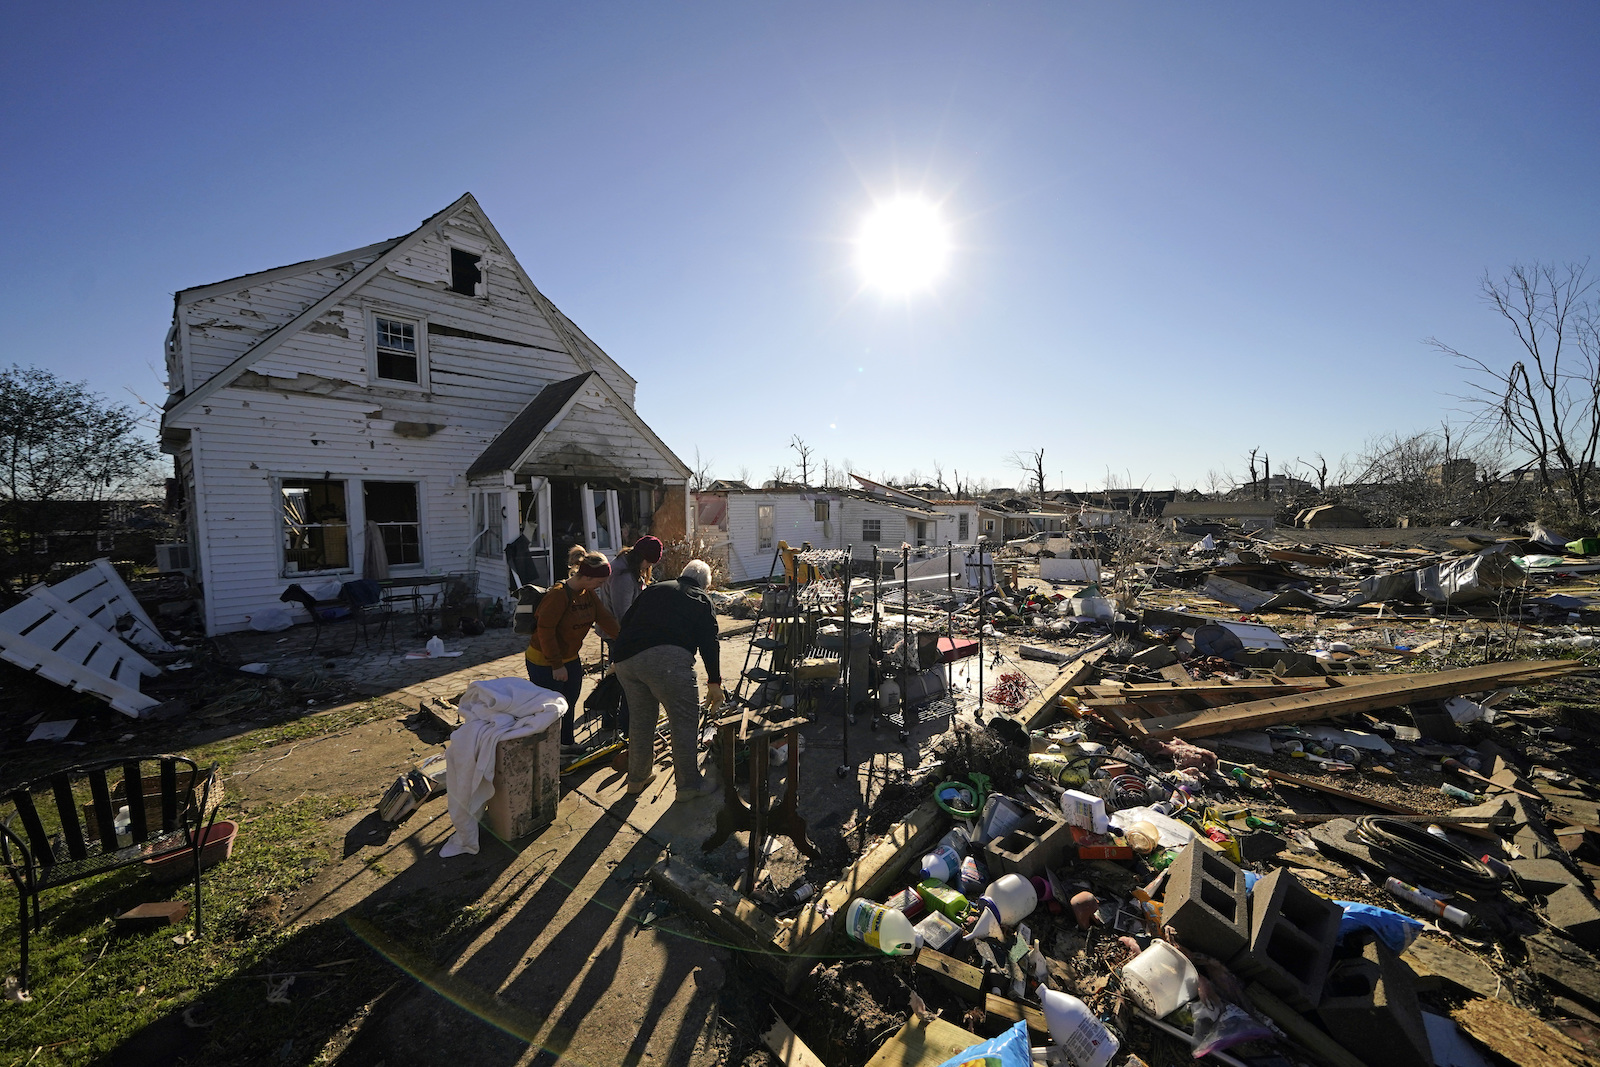 a white house with peeling paint and loose slats stands in front of a giant field of debris -- wood, bottles, and scrap metal -- through which people are walking. Overhead, a blazing sun looks down in a clear, blue sky.